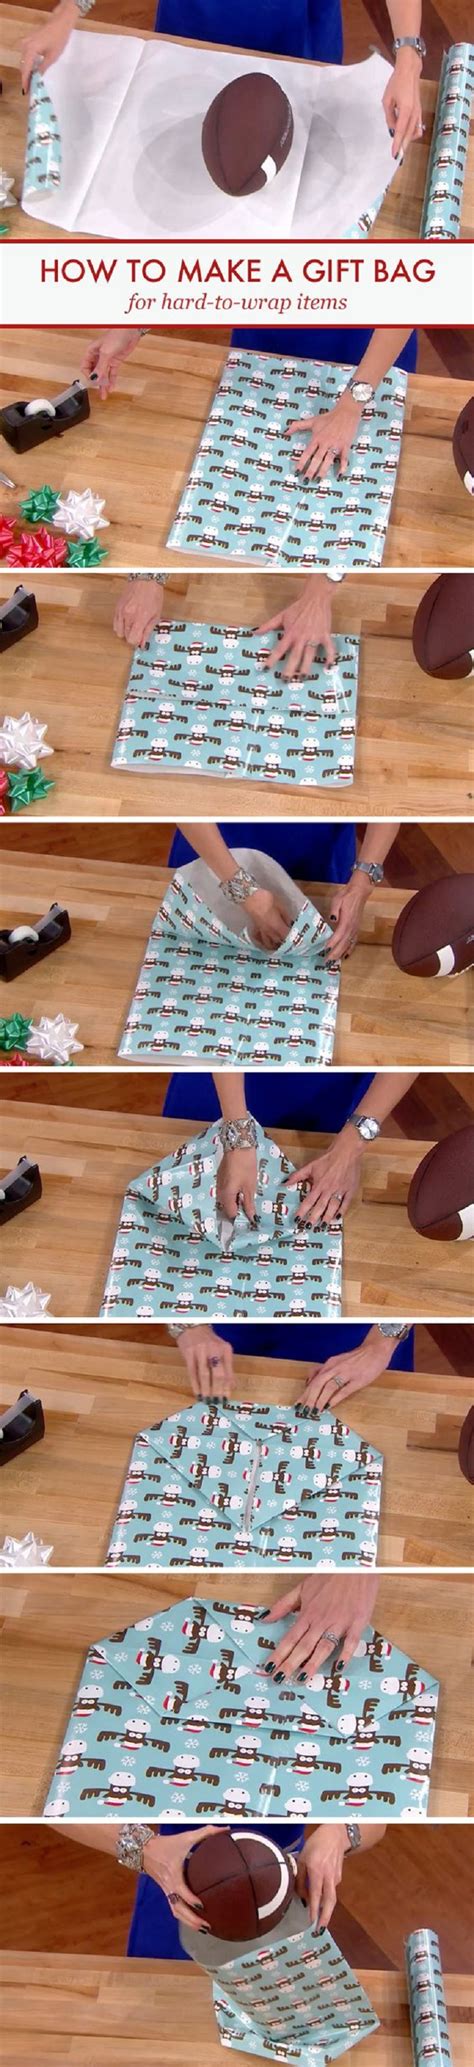 Little gift ideas for the neighborhood kiddos. 14 Useful yet Unique DIY Gift Wrapping Tutorials You ...